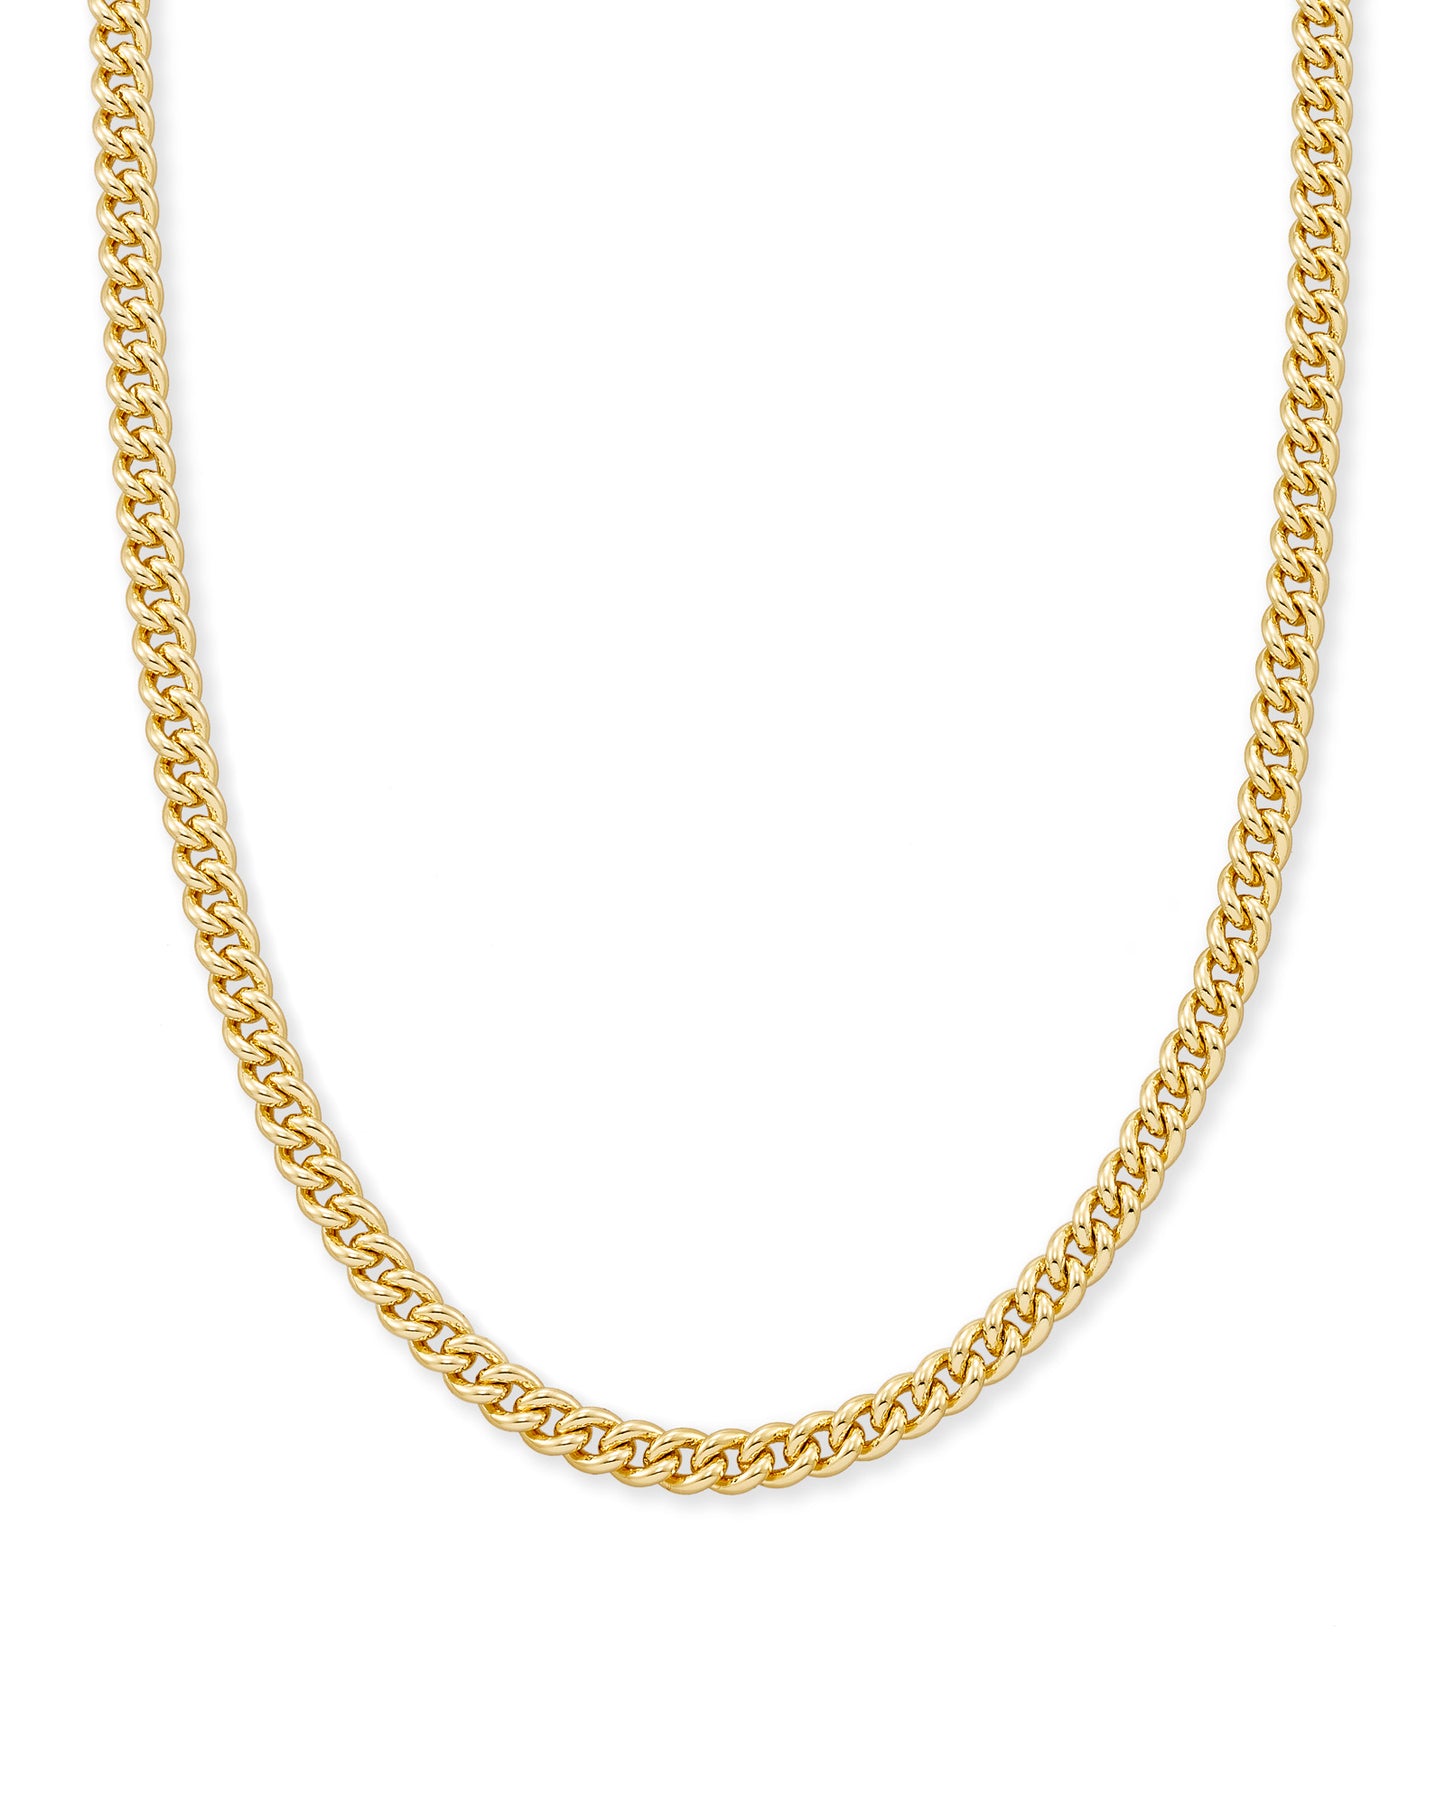 Kendra Scott: Ace Chain Necklace in Gold